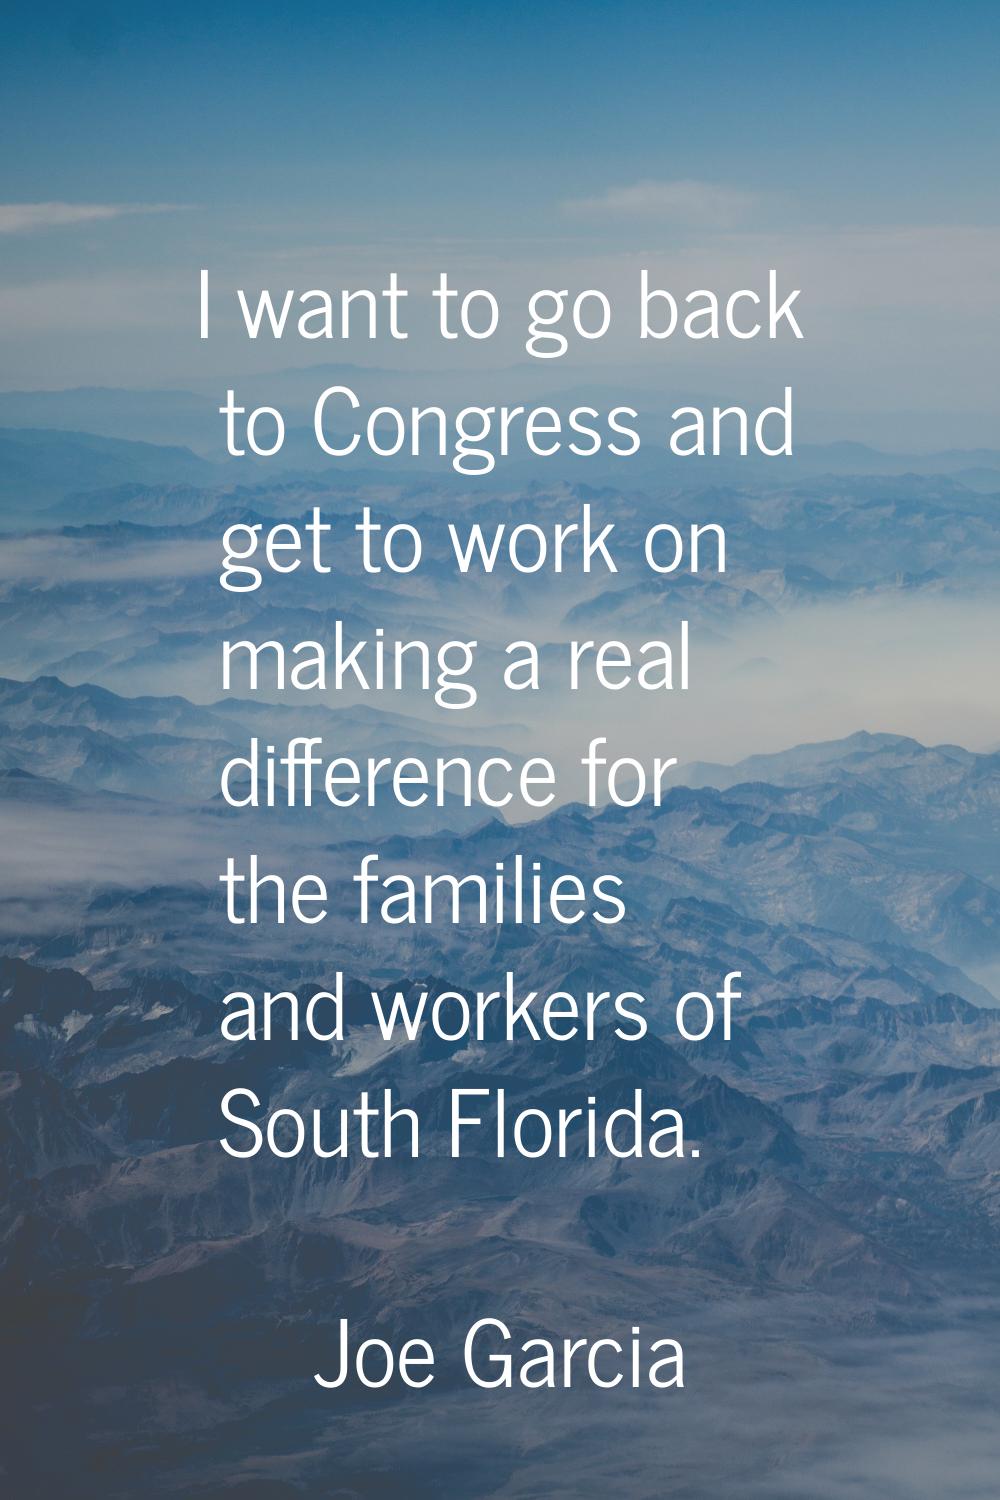 I want to go back to Congress and get to work on making a real difference for the families and work